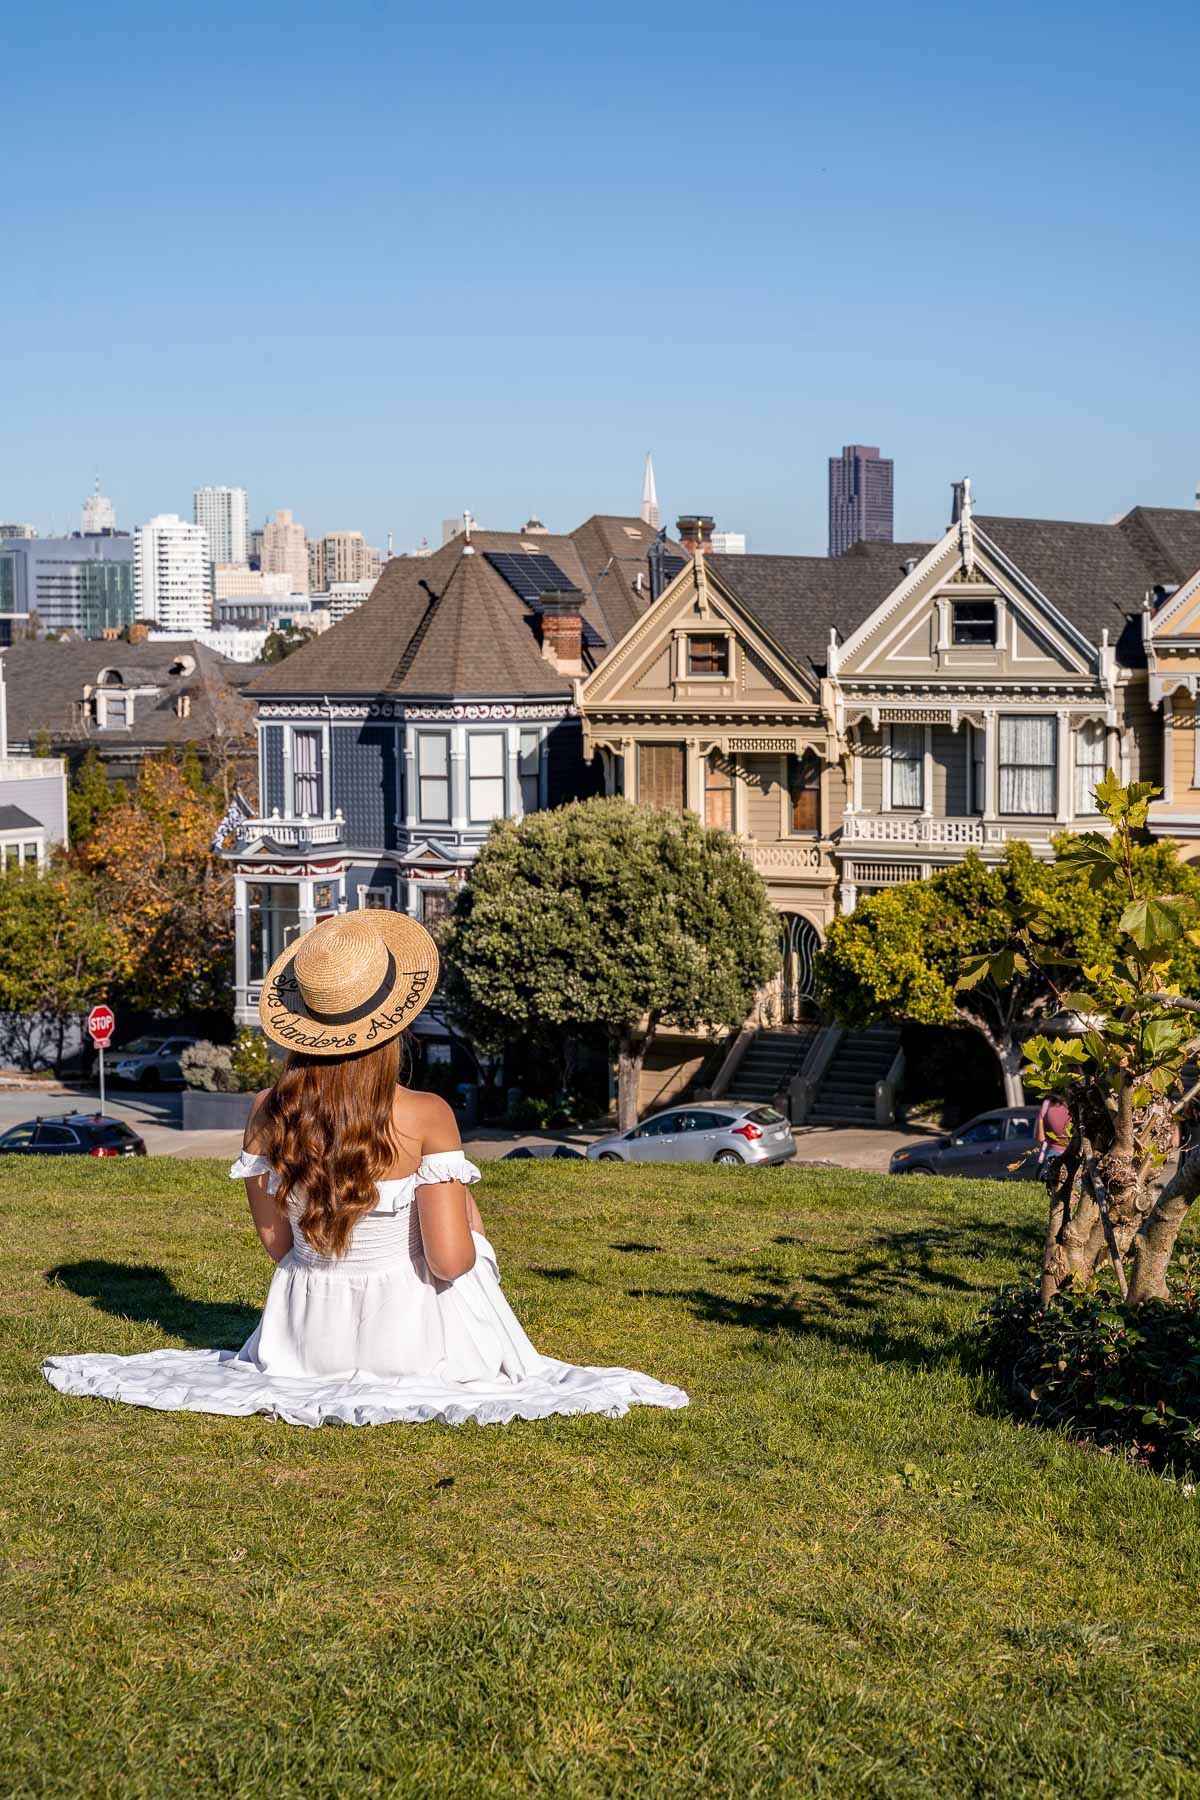 Girl in white dress in front of the Painted Ladies in San Francisco